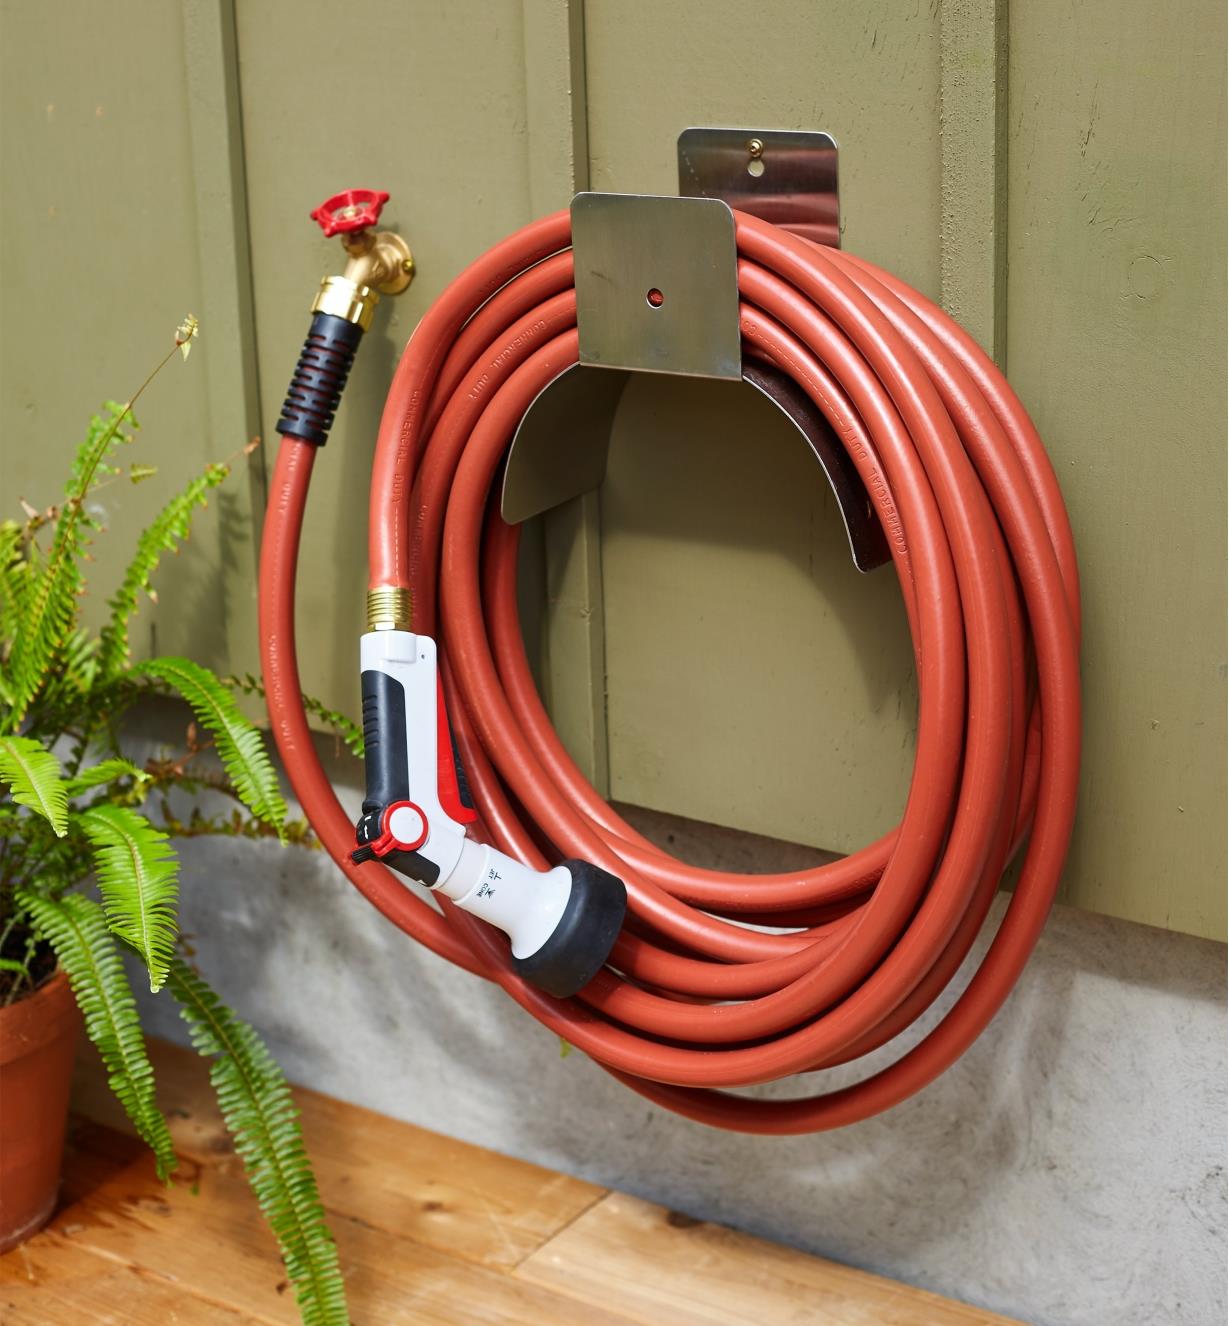 50' Hose attached to a faucet and wrapped around a hose hanger